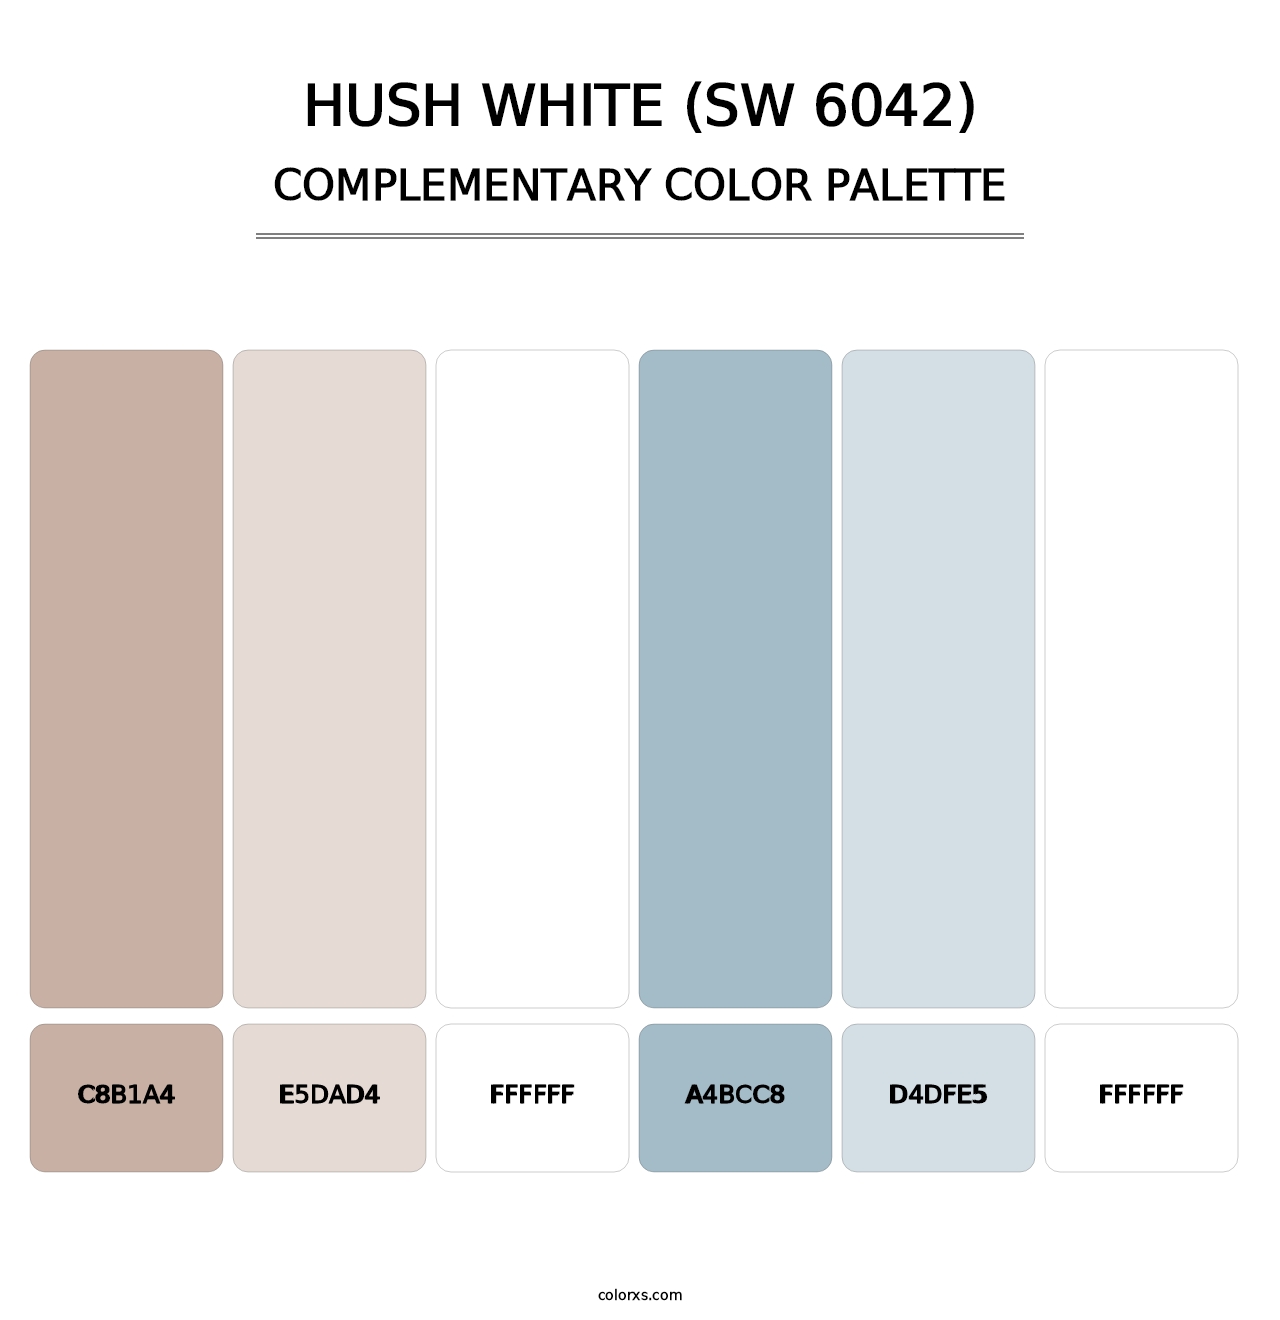 Hush White (SW 6042) - Complementary Color Palette